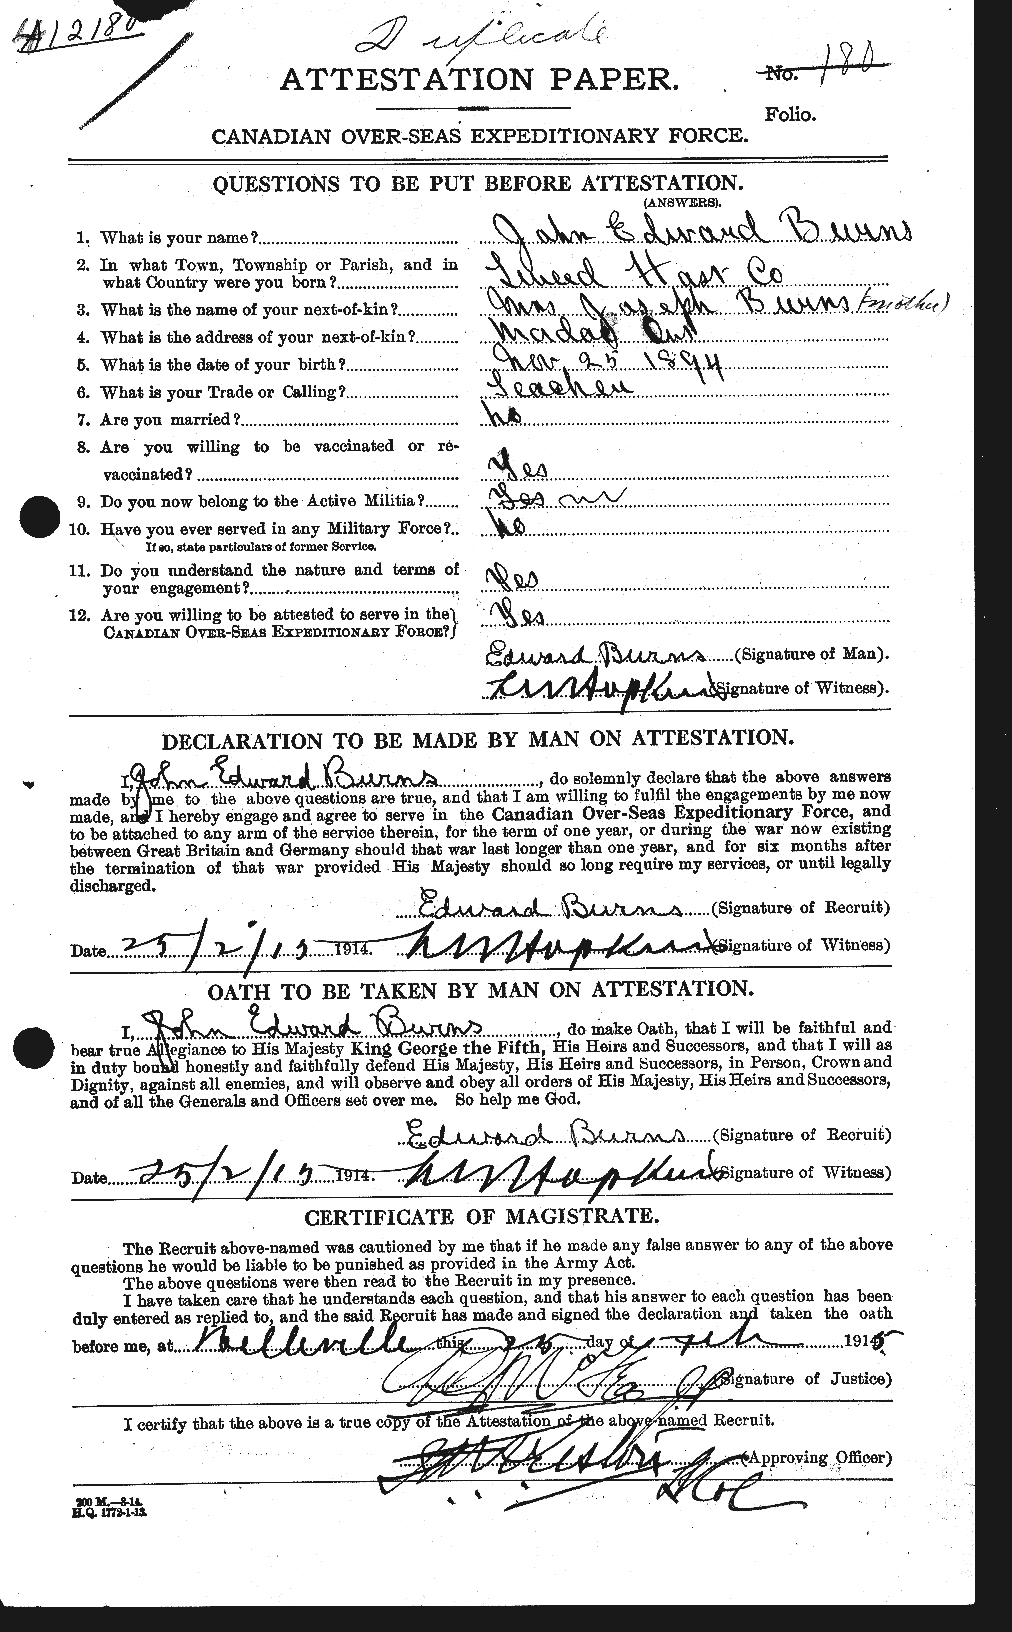 Personnel Records of the First World War - CEF 275481a